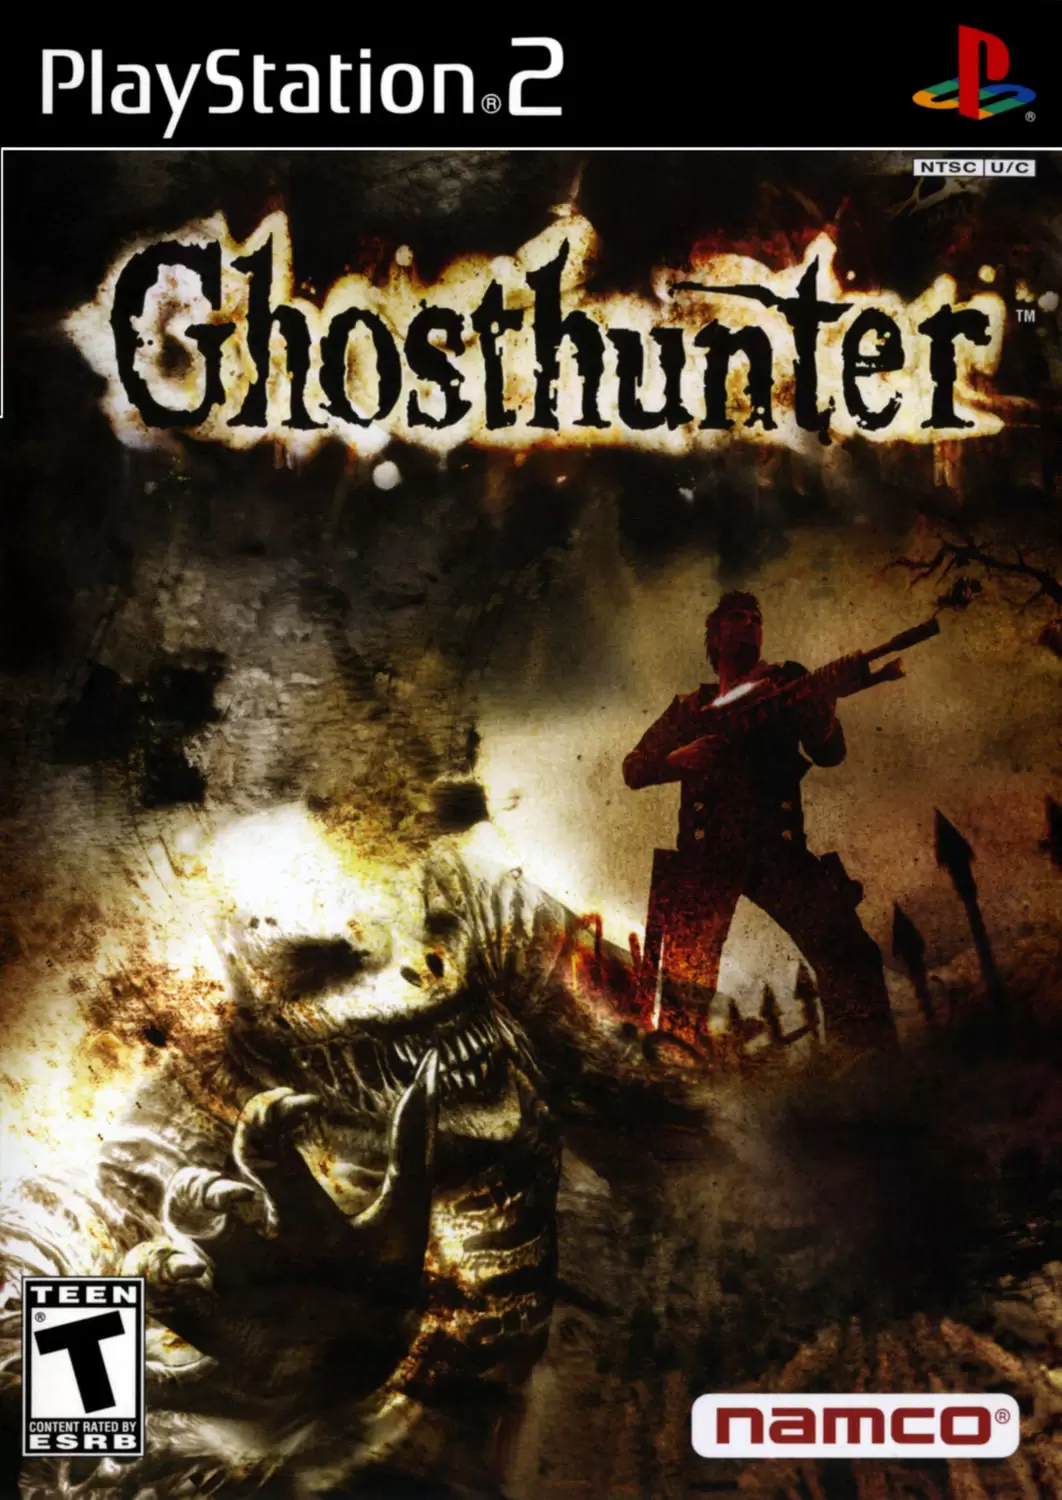 PS2 Games - Ghosthunter